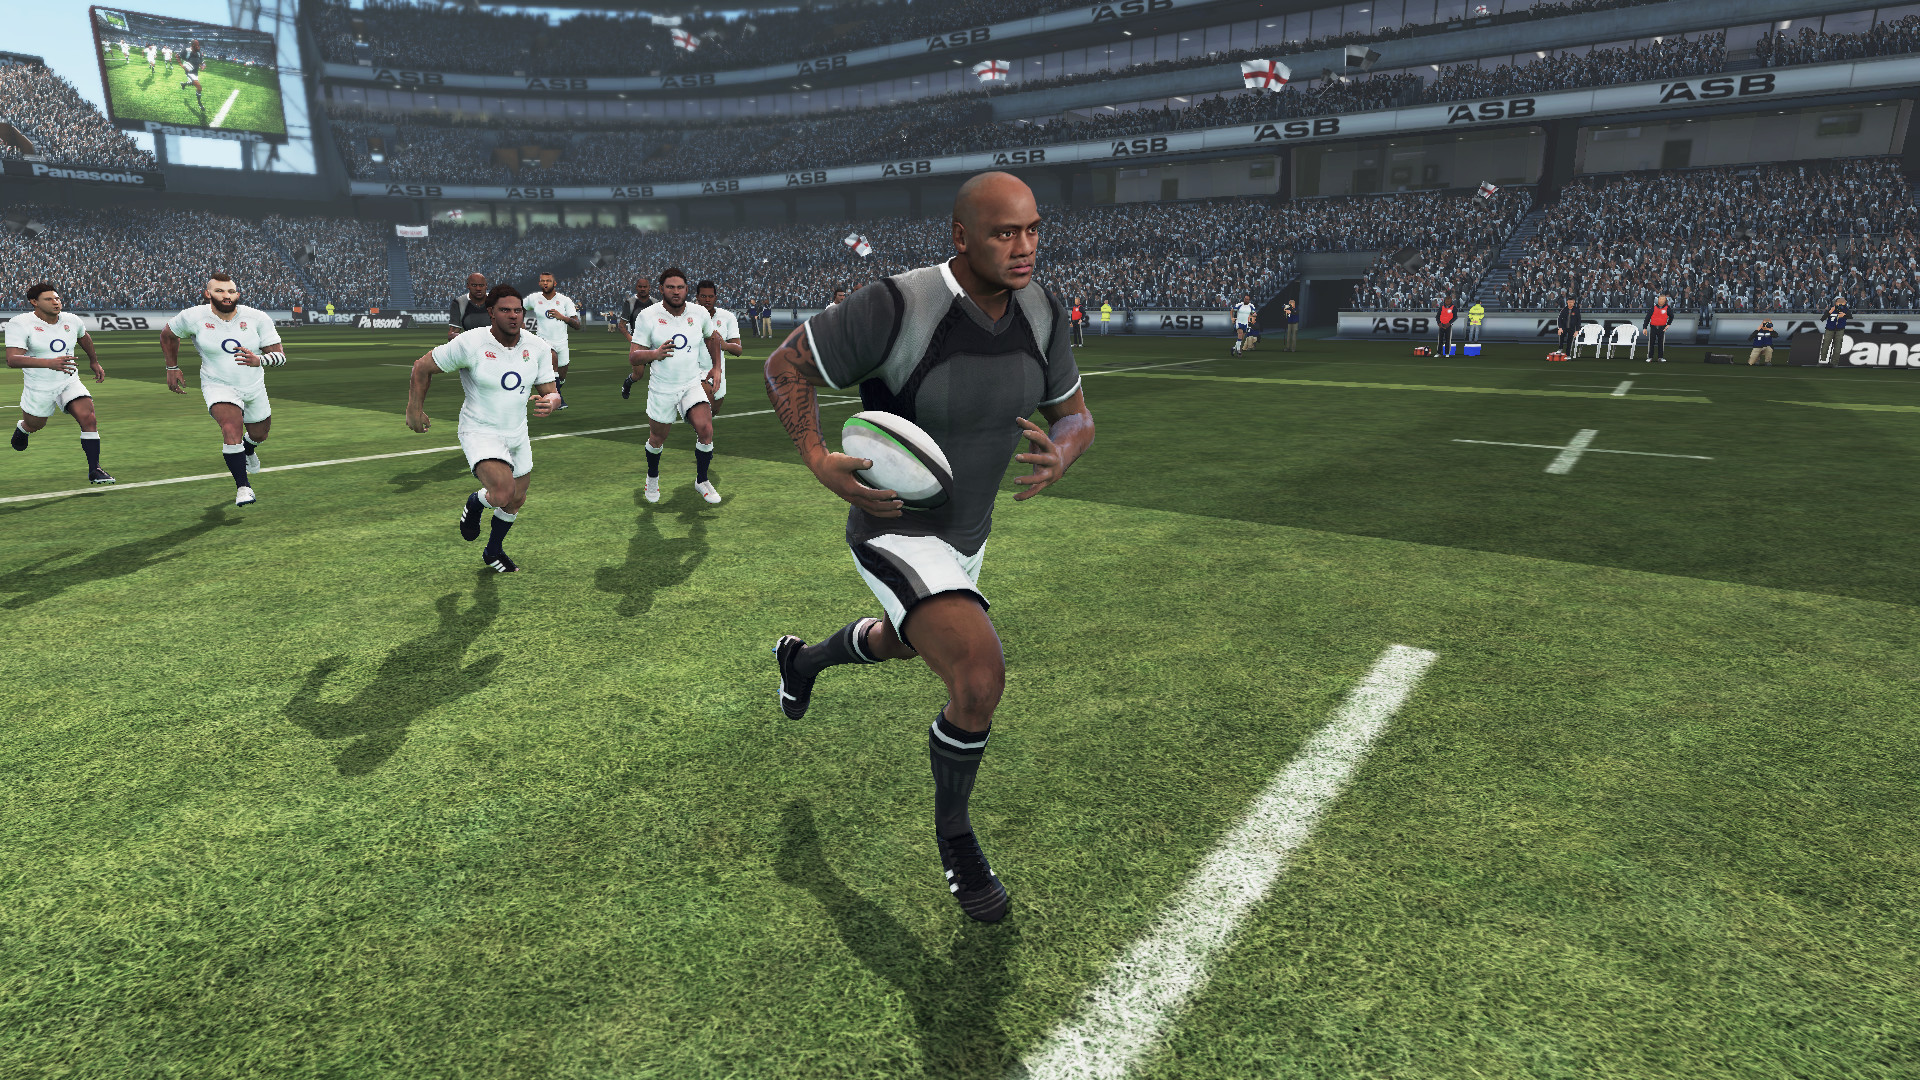 pc rugby games